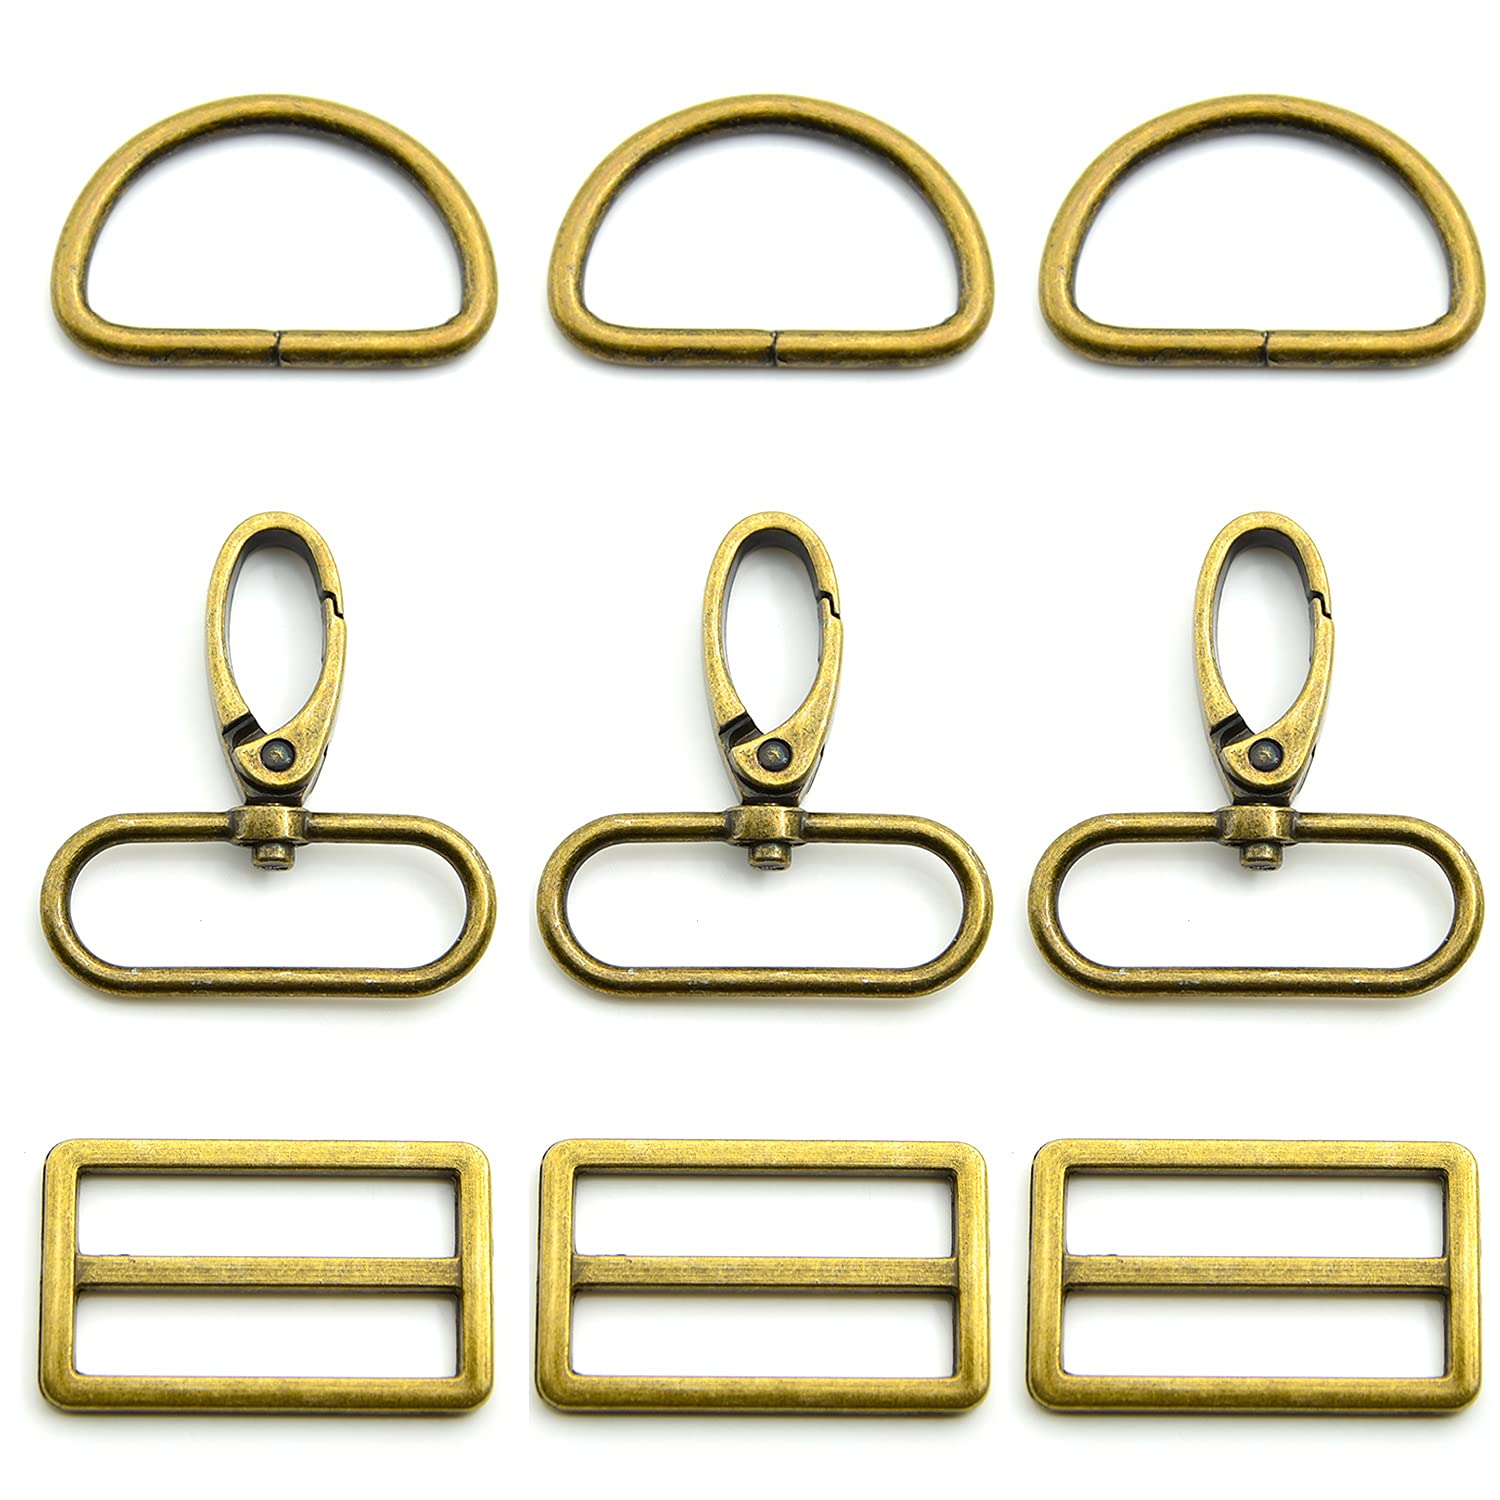 MELORDY 15Pcs Metal Swivel Snaps Hooks with D Rings and Tri-Glides